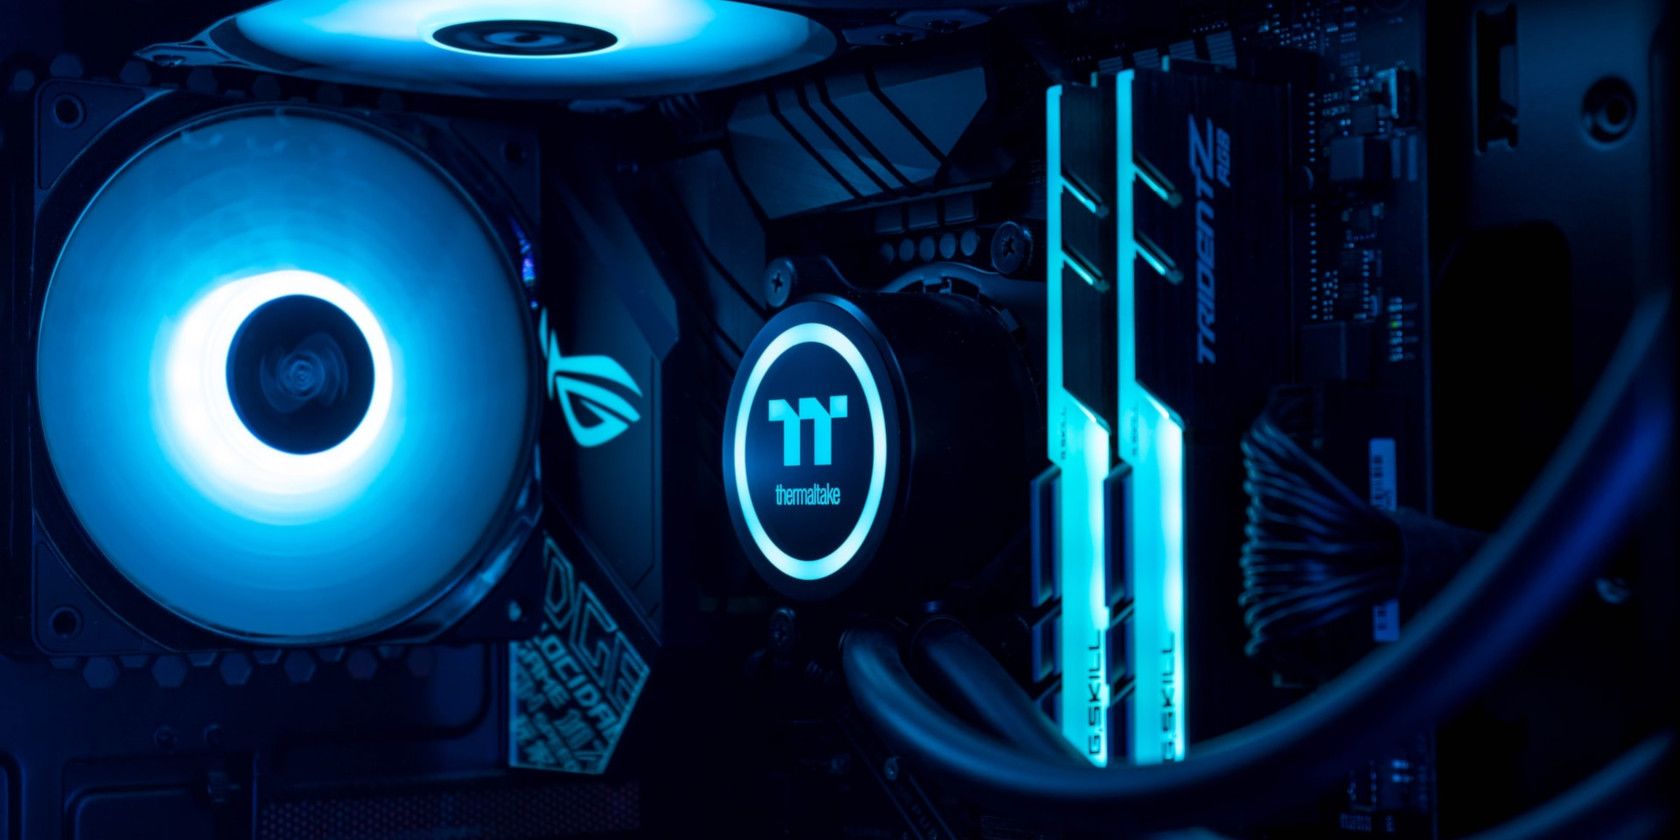 What Is a Cooled PC and Should Build One?